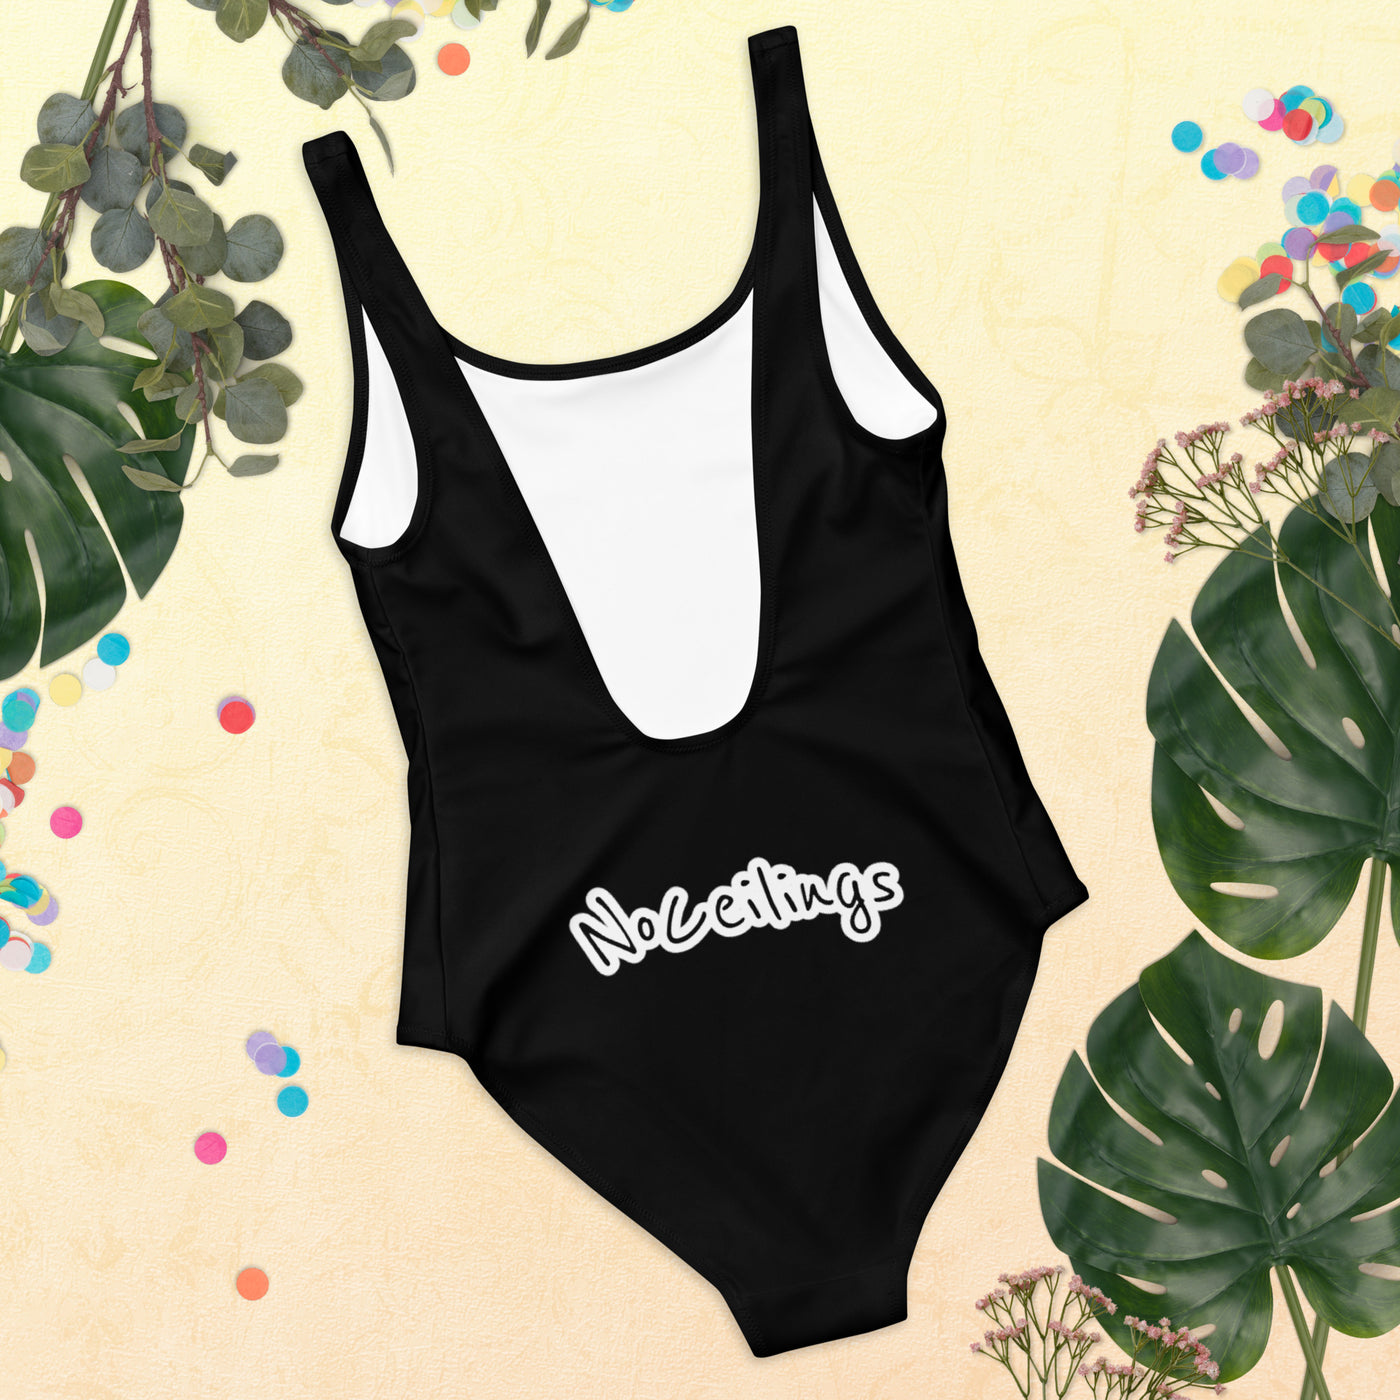 No Fake Love One-Piece Swimsuit